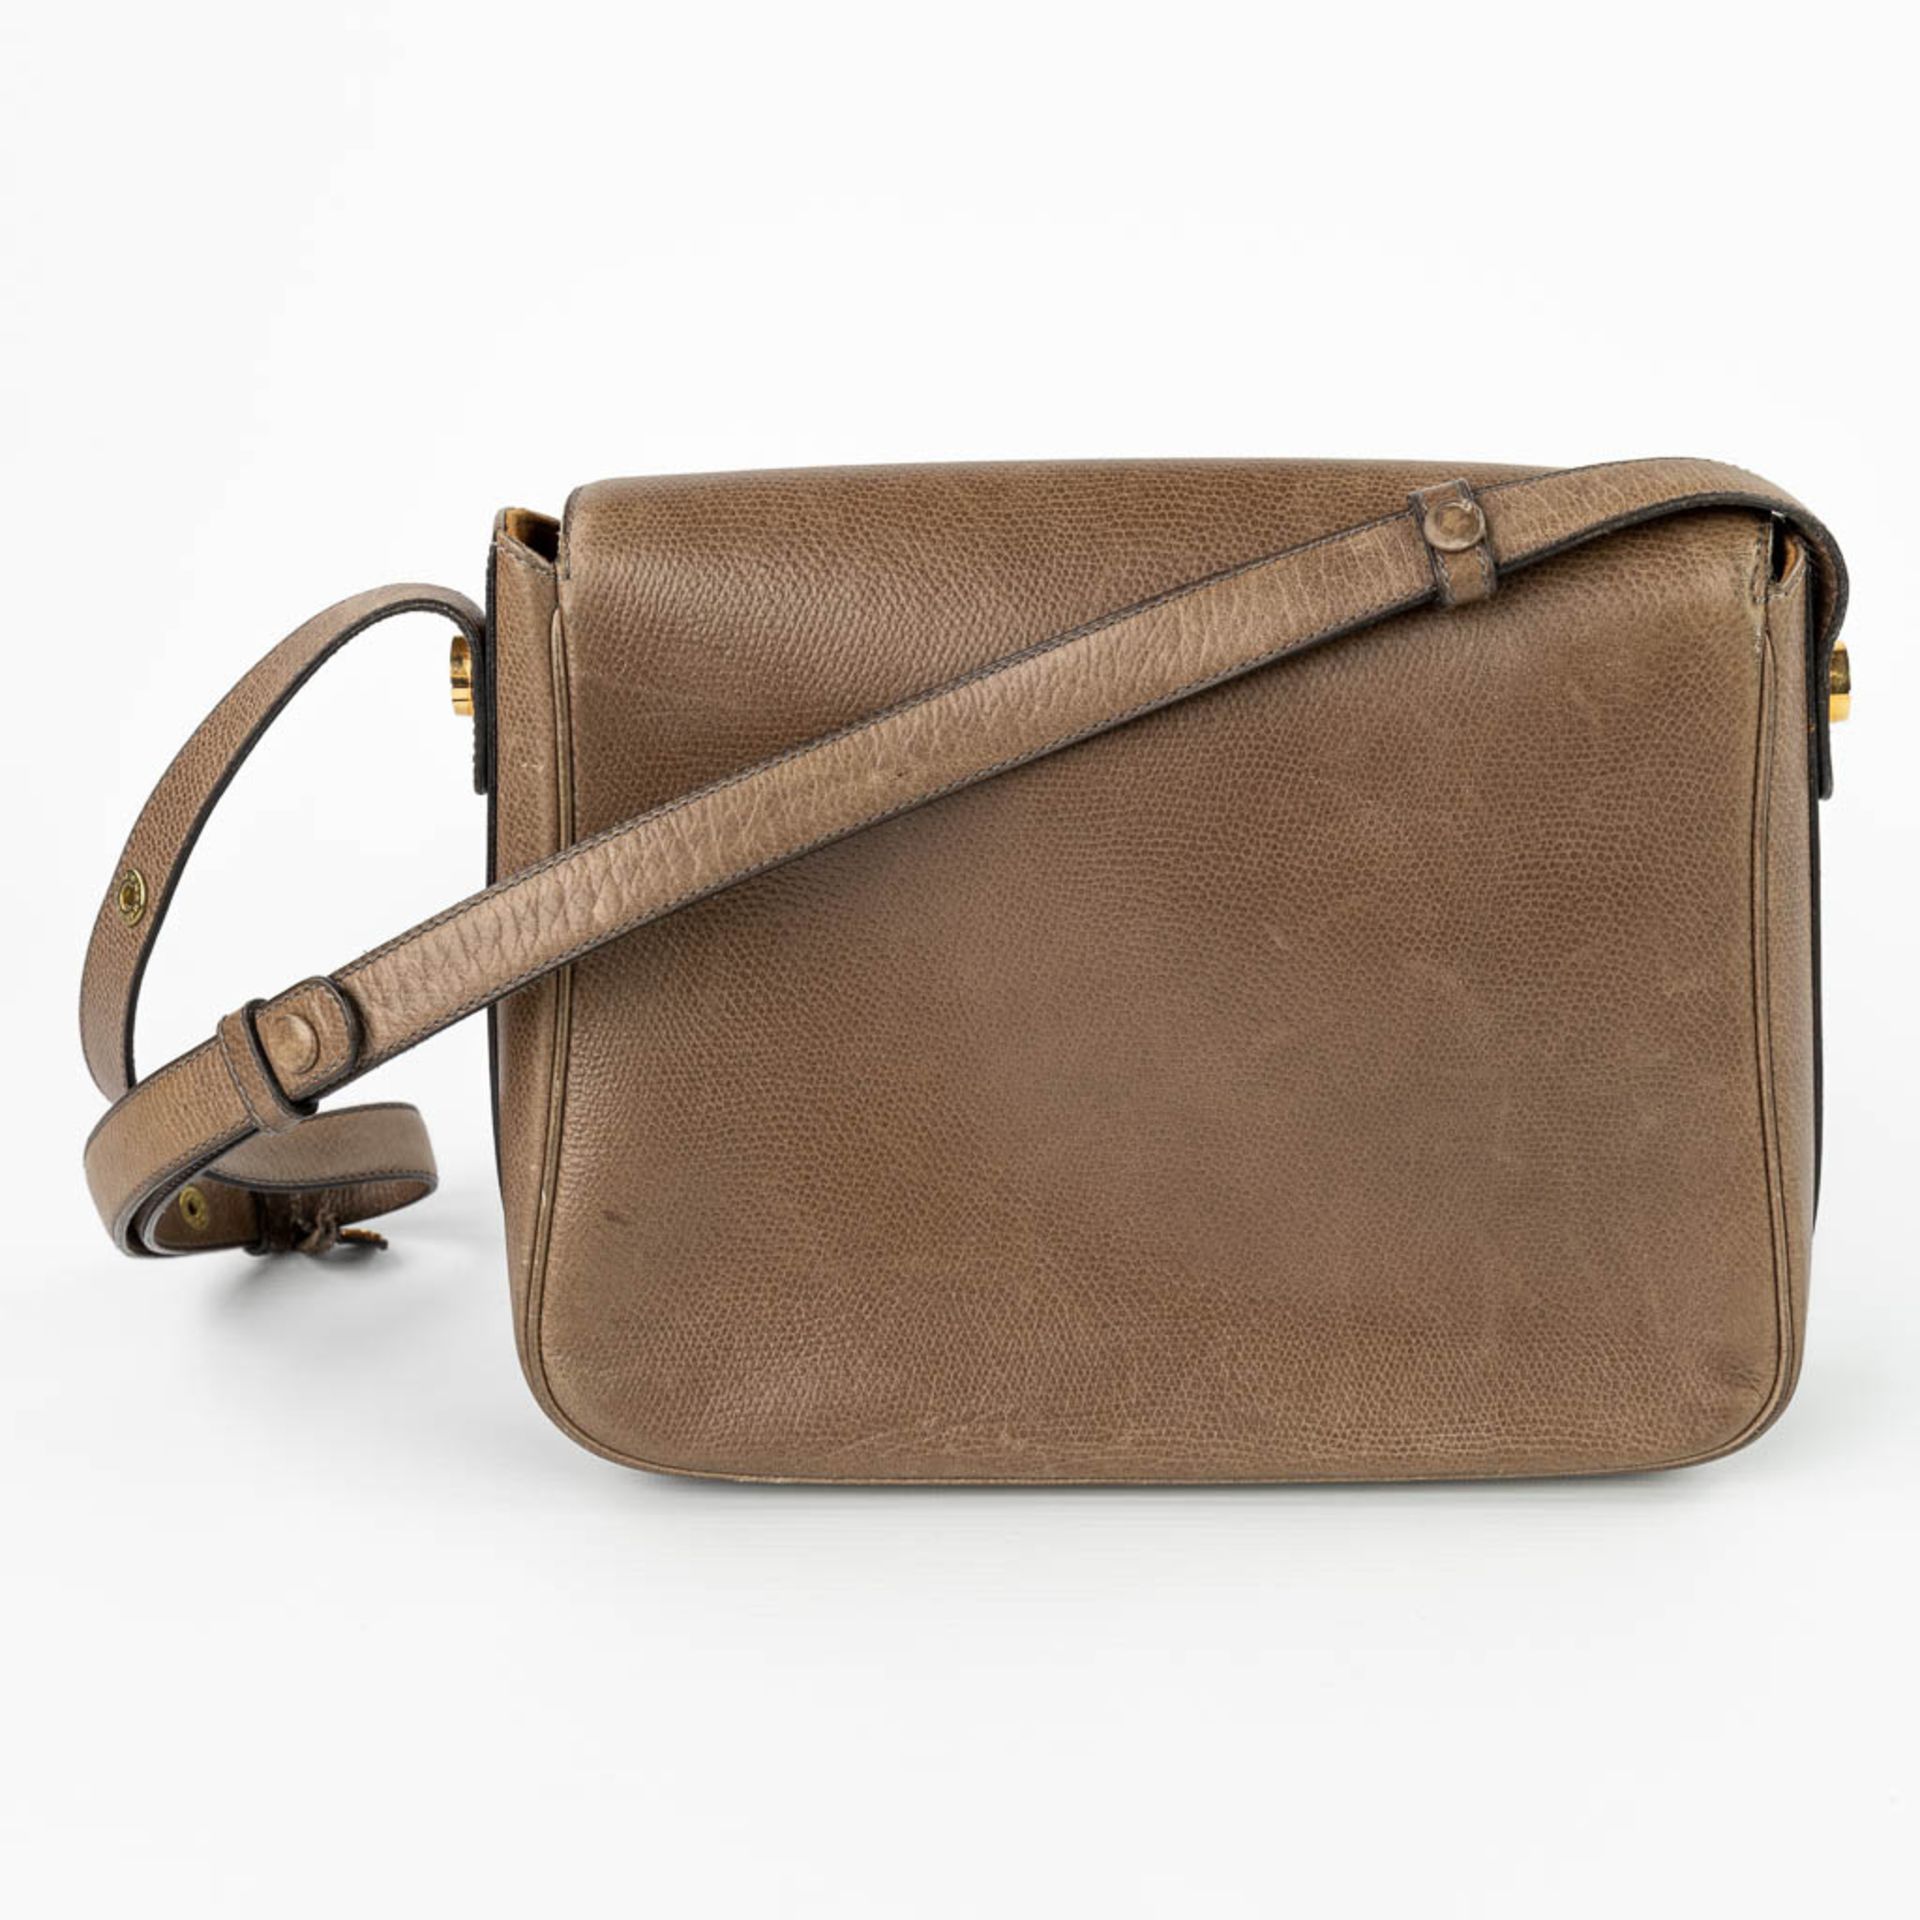 A handbag made of brown leather and marked Delvaux. (H:22cm) - Image 5 of 14